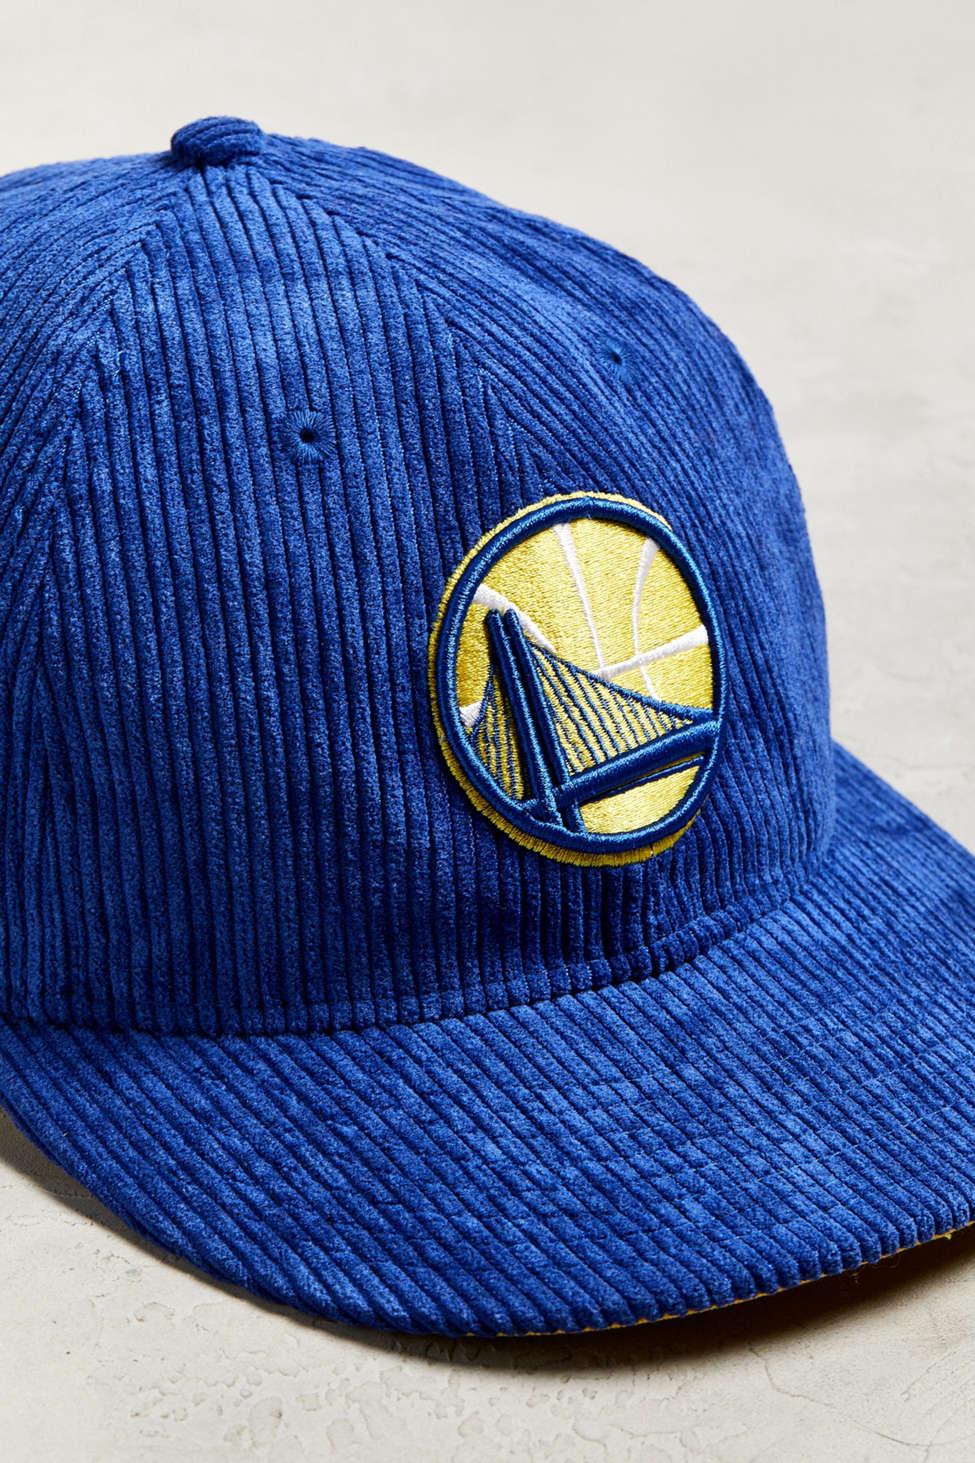 Golden State Warriors New Era 59FIFTY Vintage Logo Fitted Cap Hat